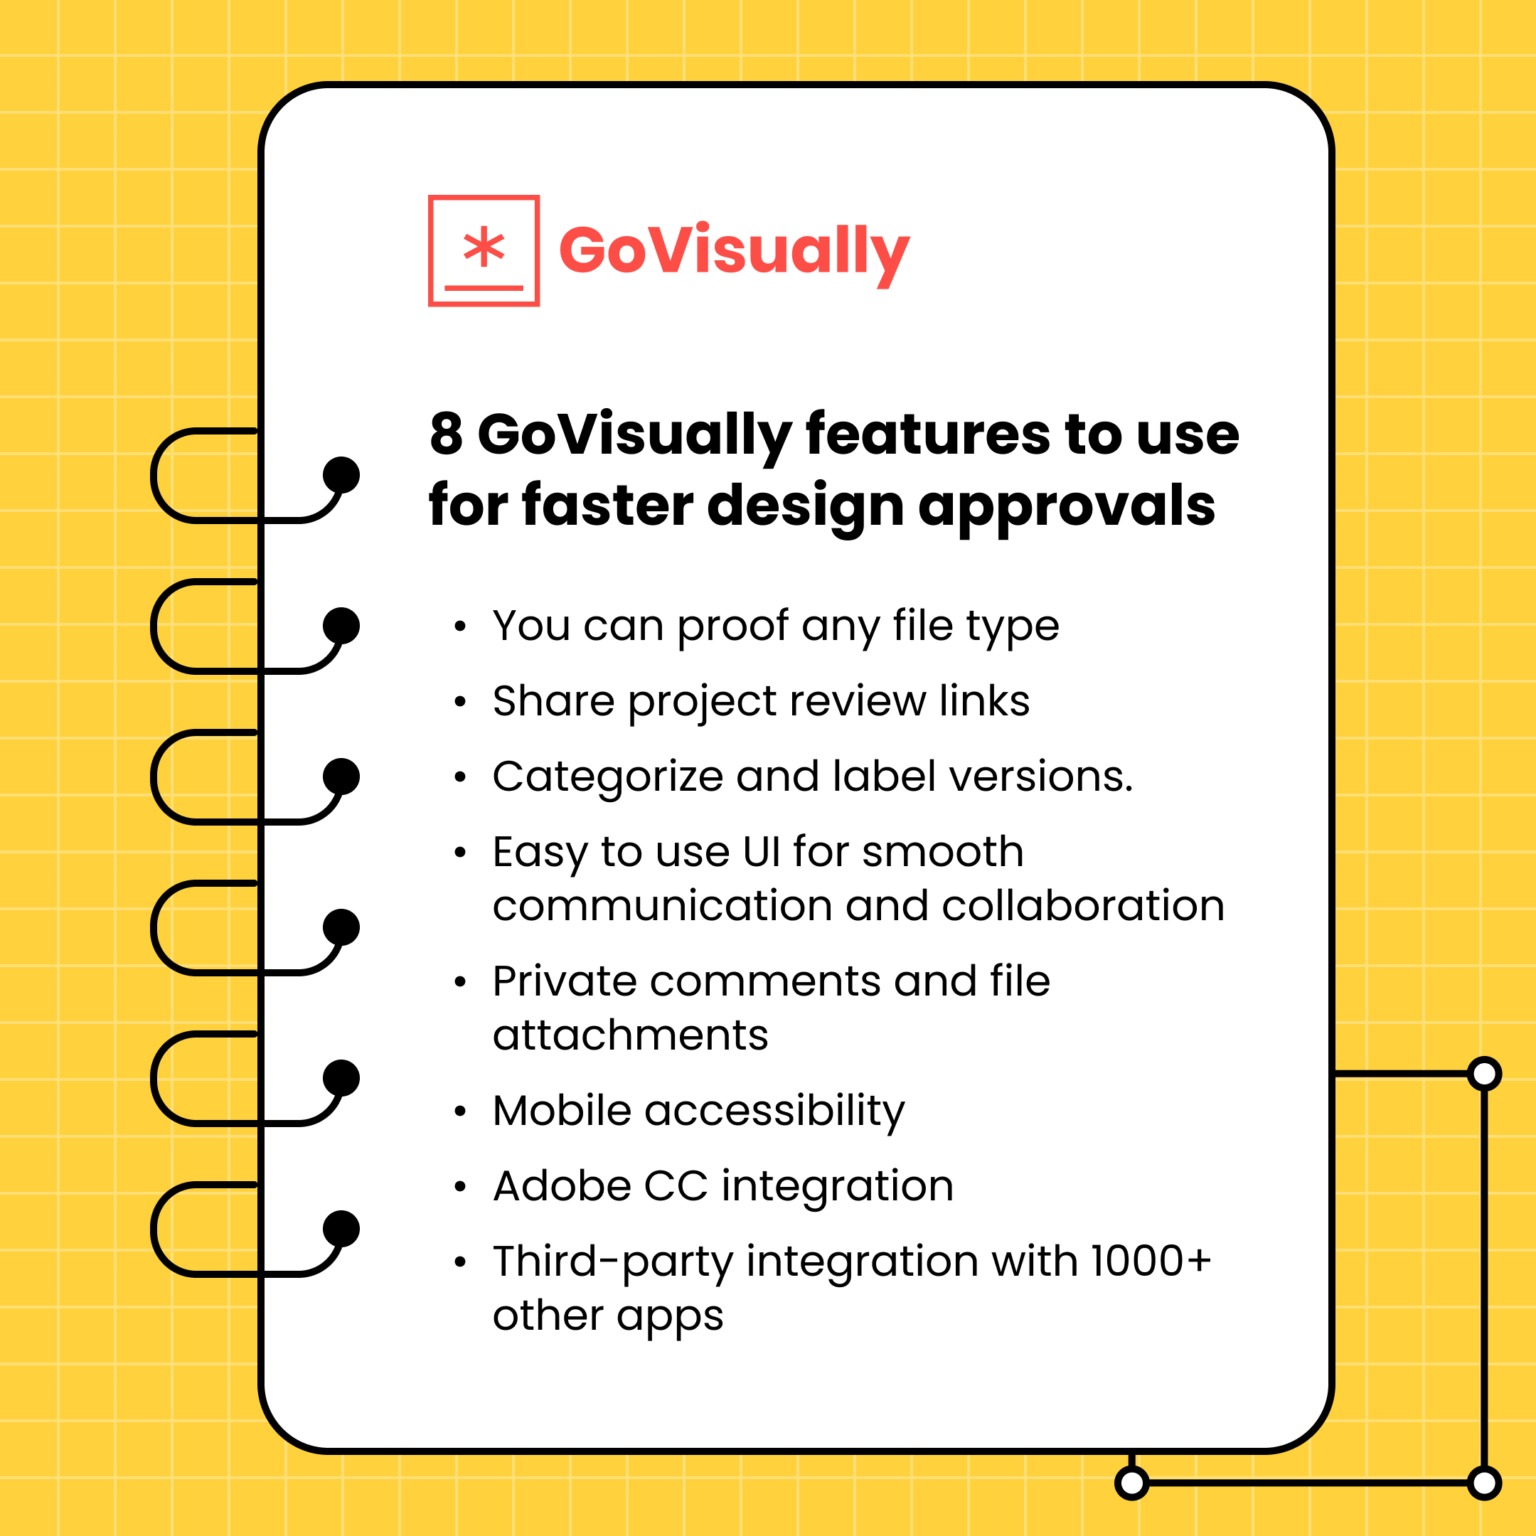 How to work with corporate clients to get faster design approvals ...